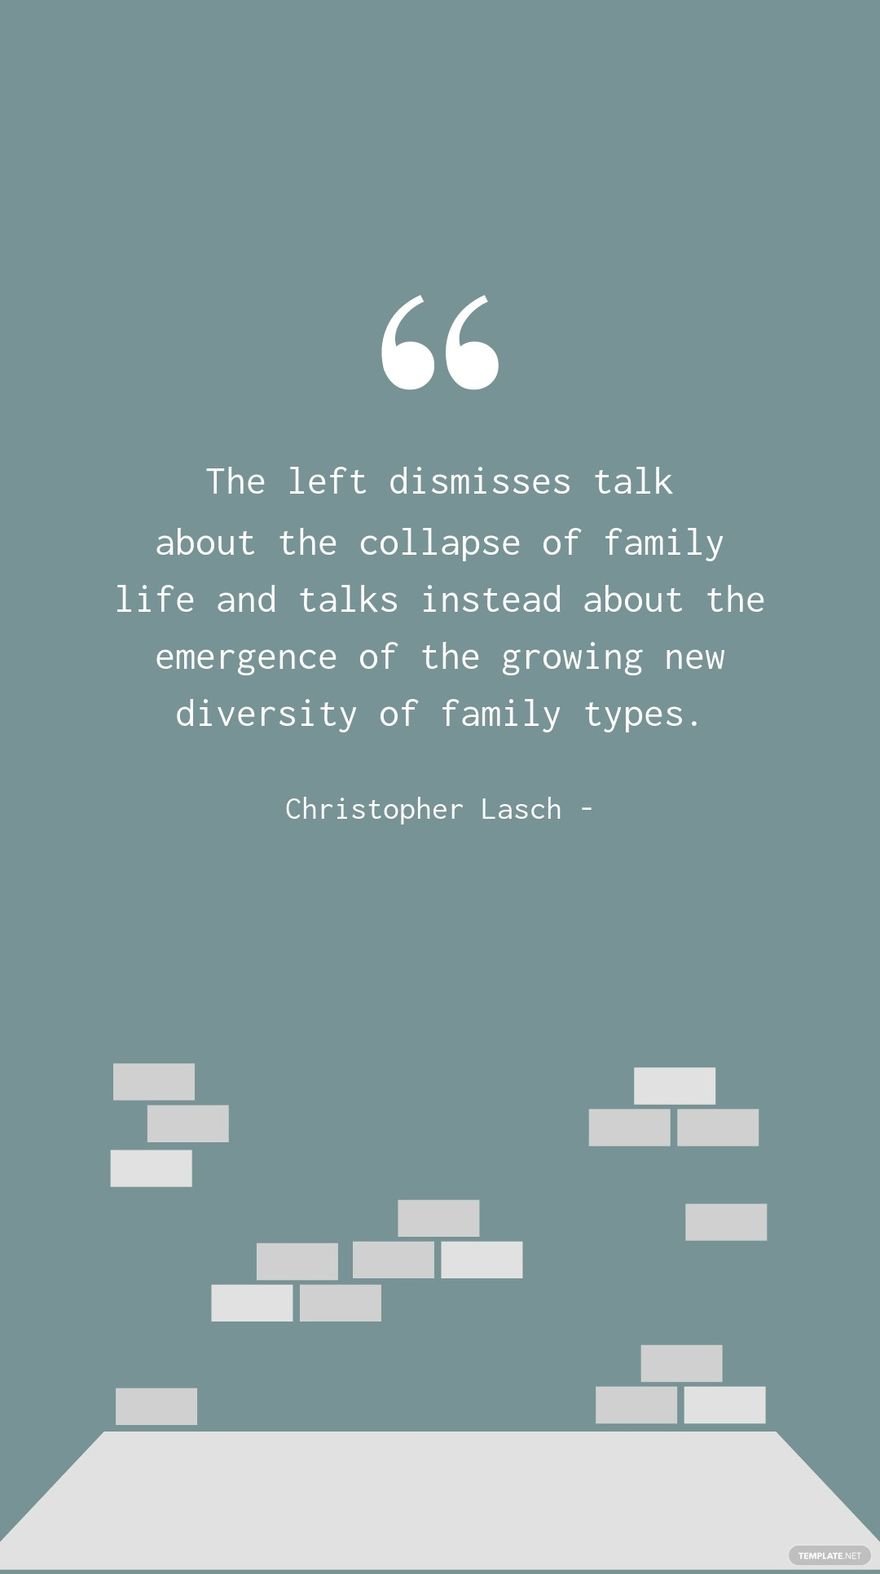 Free Christopher Lasch - The left dismisses talk about the collapse of family life and talks instead about the emergence of the growing new diversity of family types. in JPG